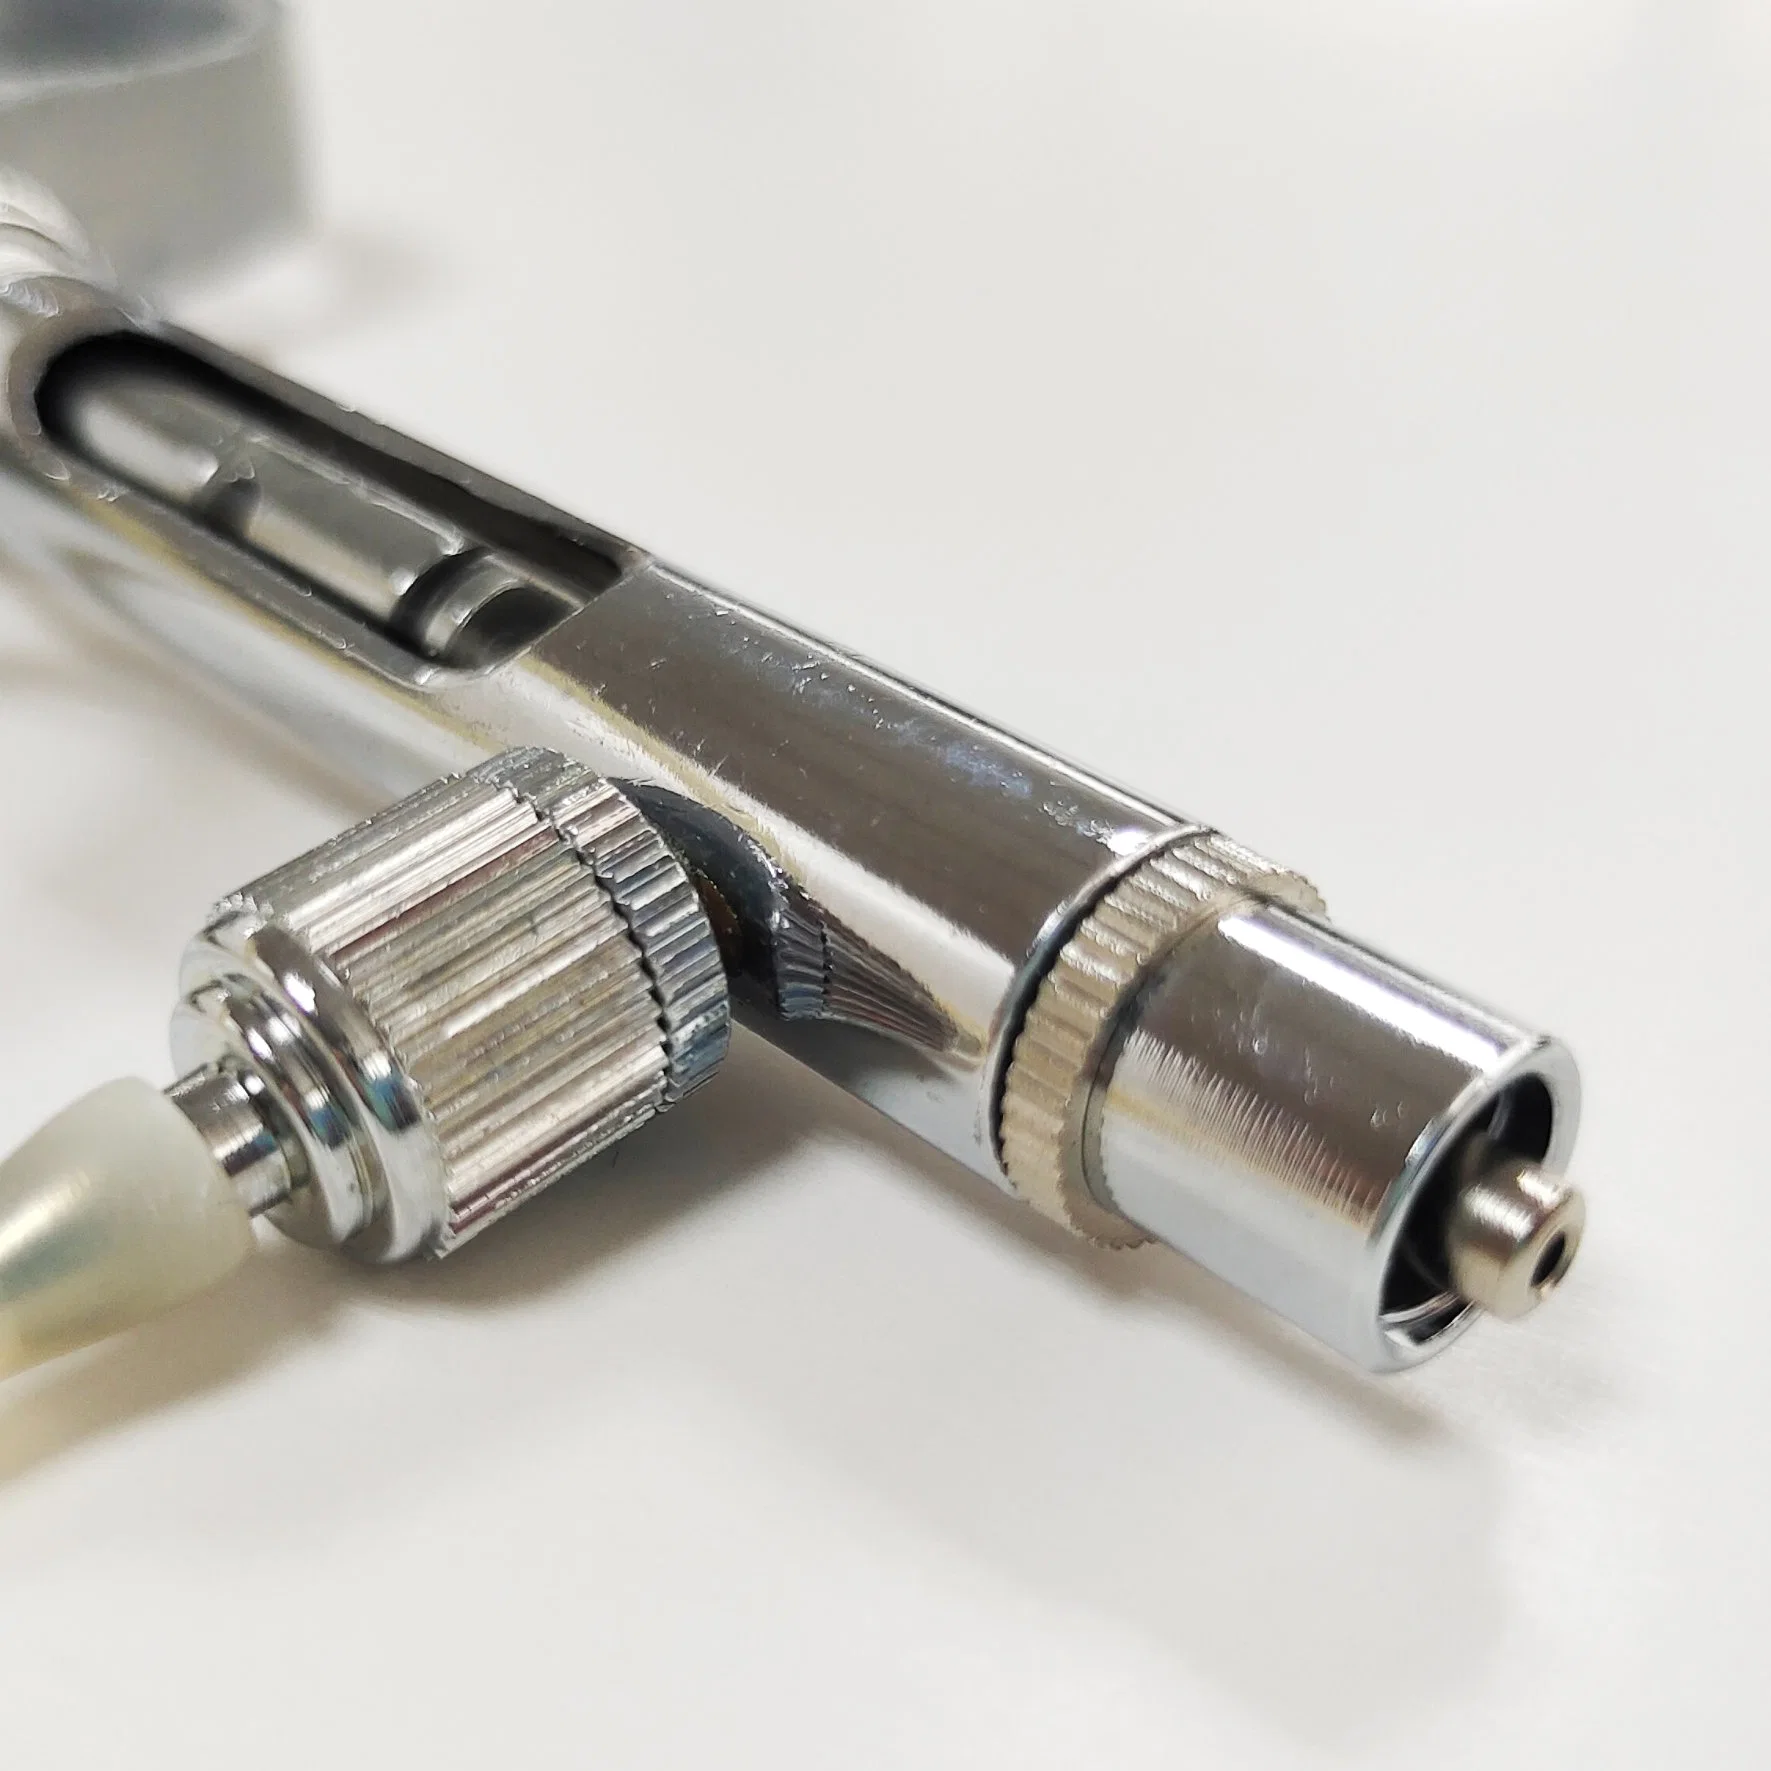 Continuous Syringe and  metal injector  for Veterinary use(TS070329)